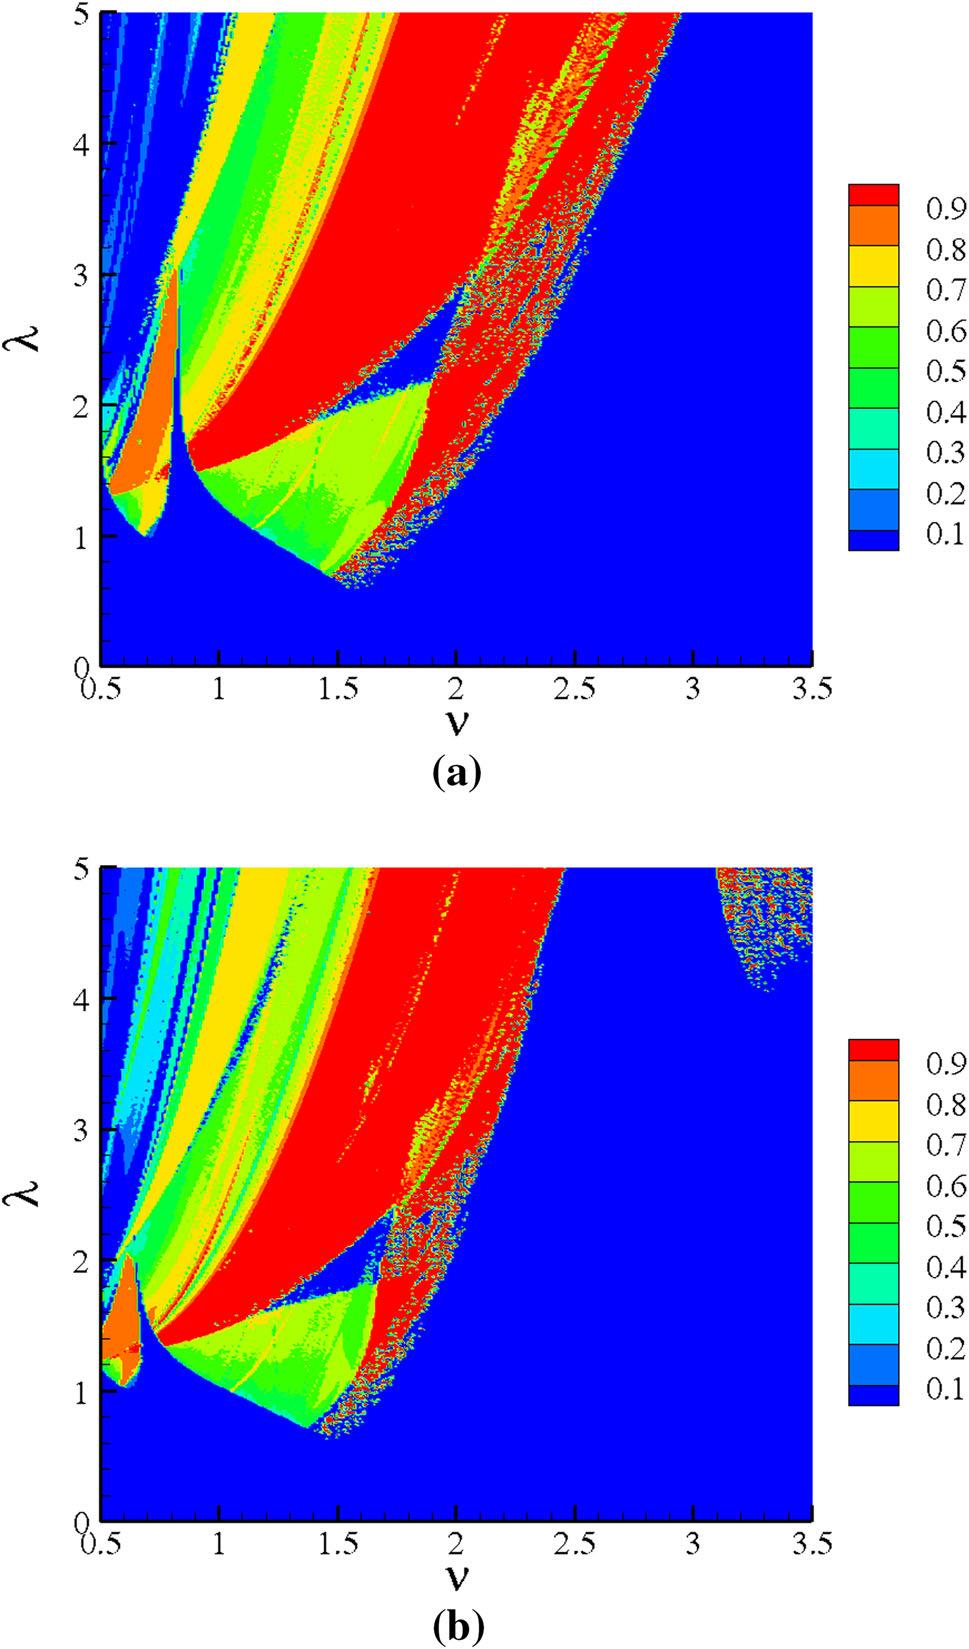 Dynamics of a parametric rotating pendulum under a realistic wave profile θ + 2α θ + [1 + f (νt)/g] sin θ = 0 λ = Aω2 g (2) where A and ω are the wave amplitude and frequency, g the acceleration of